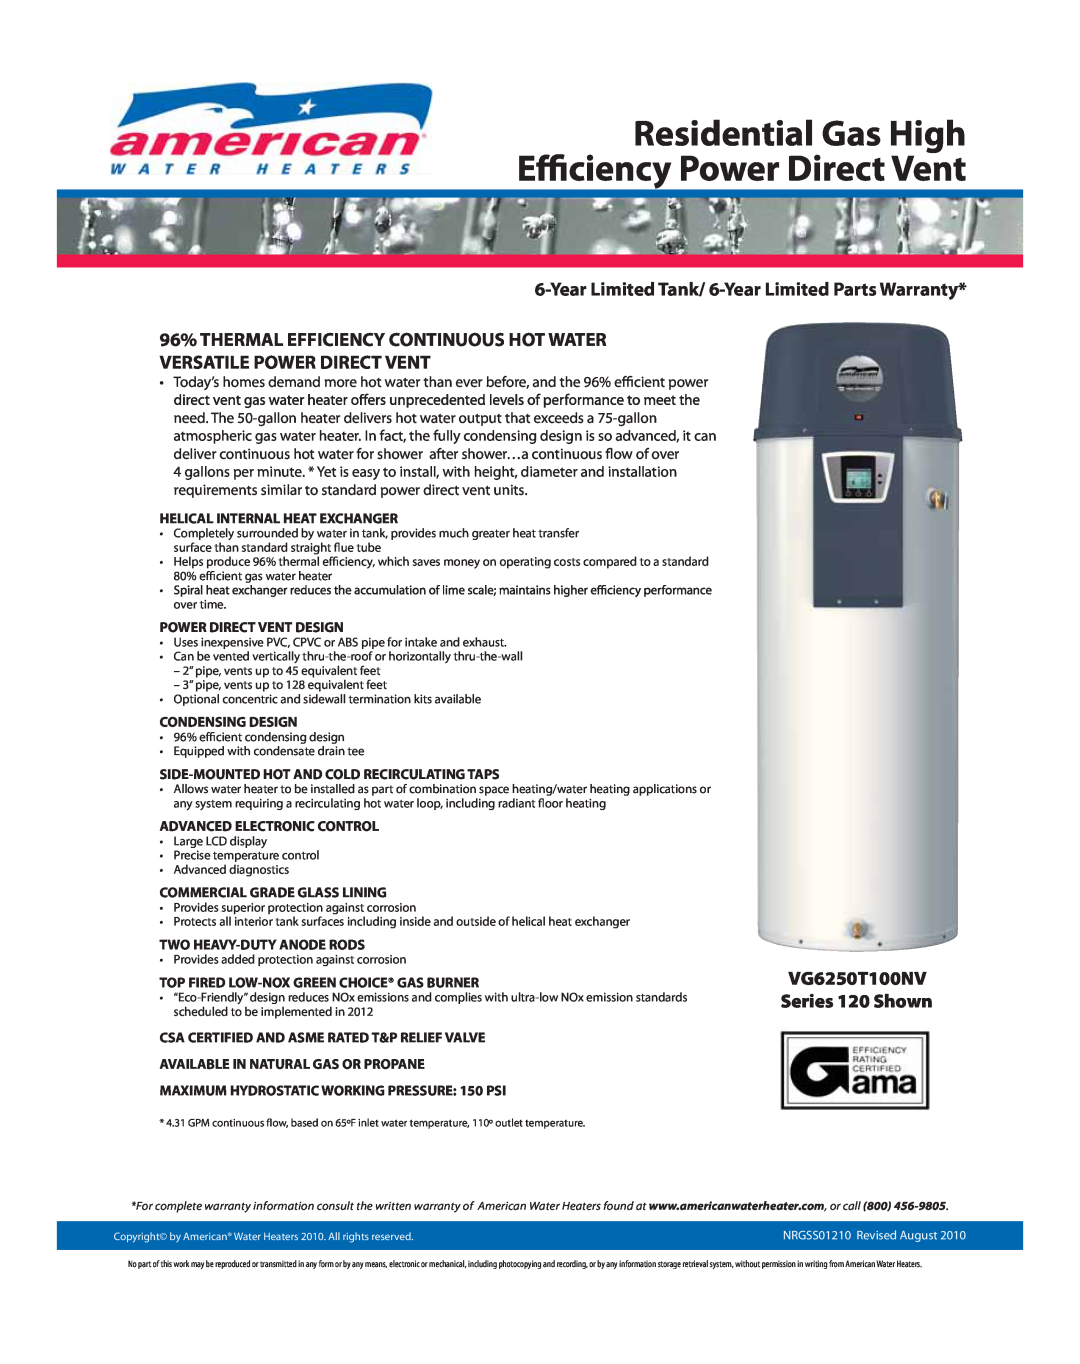 American Water Heater NRGSS01210 warranty Year Limited Tank/ 6-Year Limited Parts Warranty, Residential Gas High 